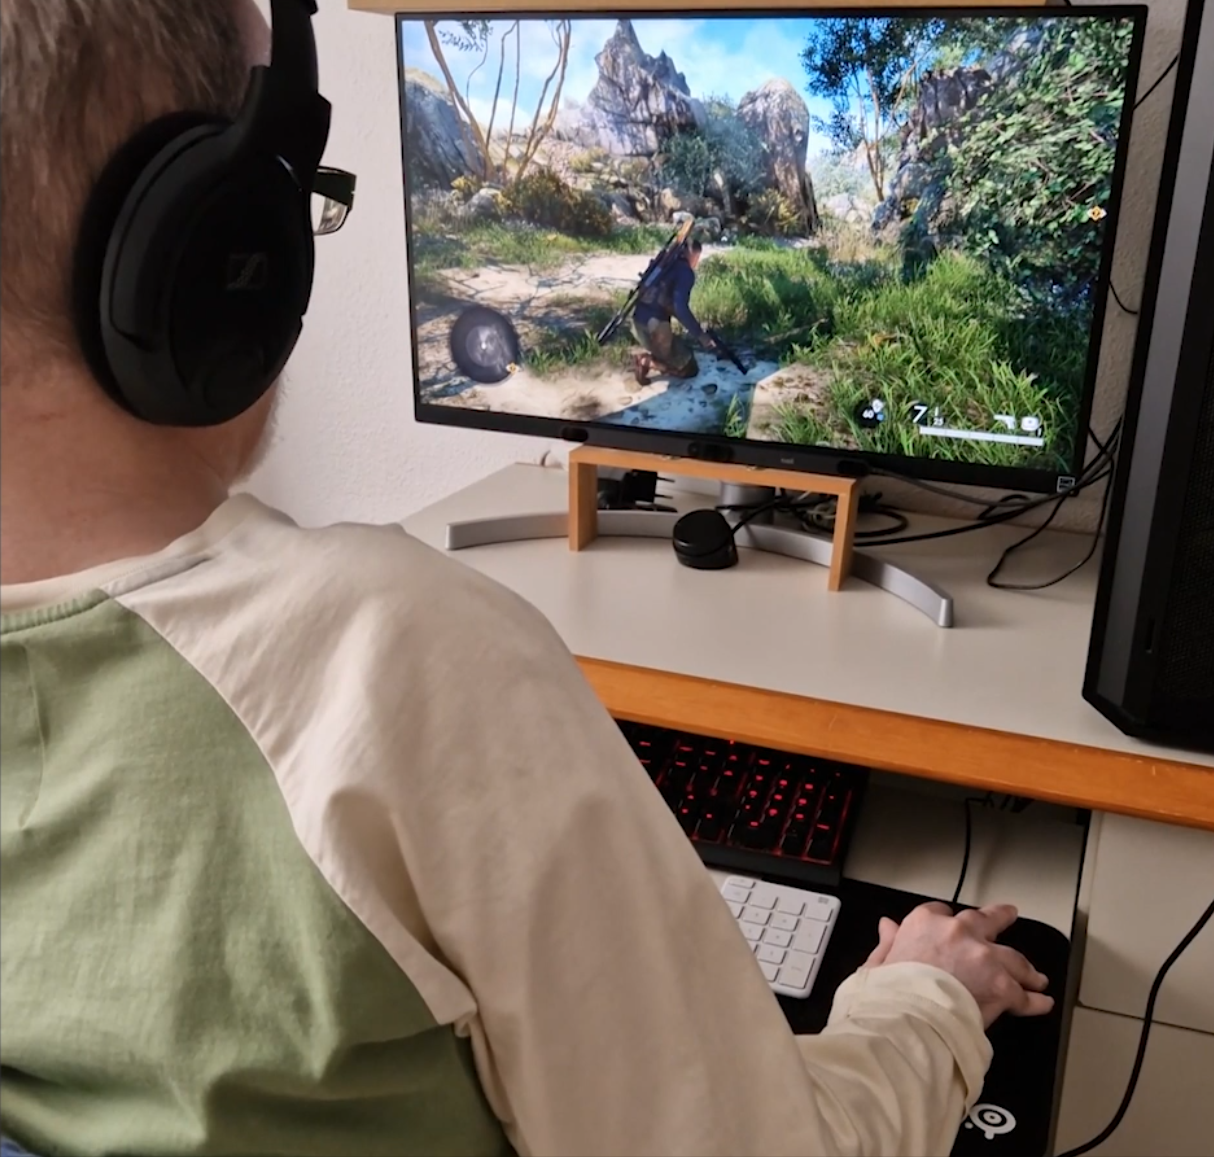 An over the shoulder shot of Antonio Martinez who plays Sniper Elite 5 with a specialised gaming set up.